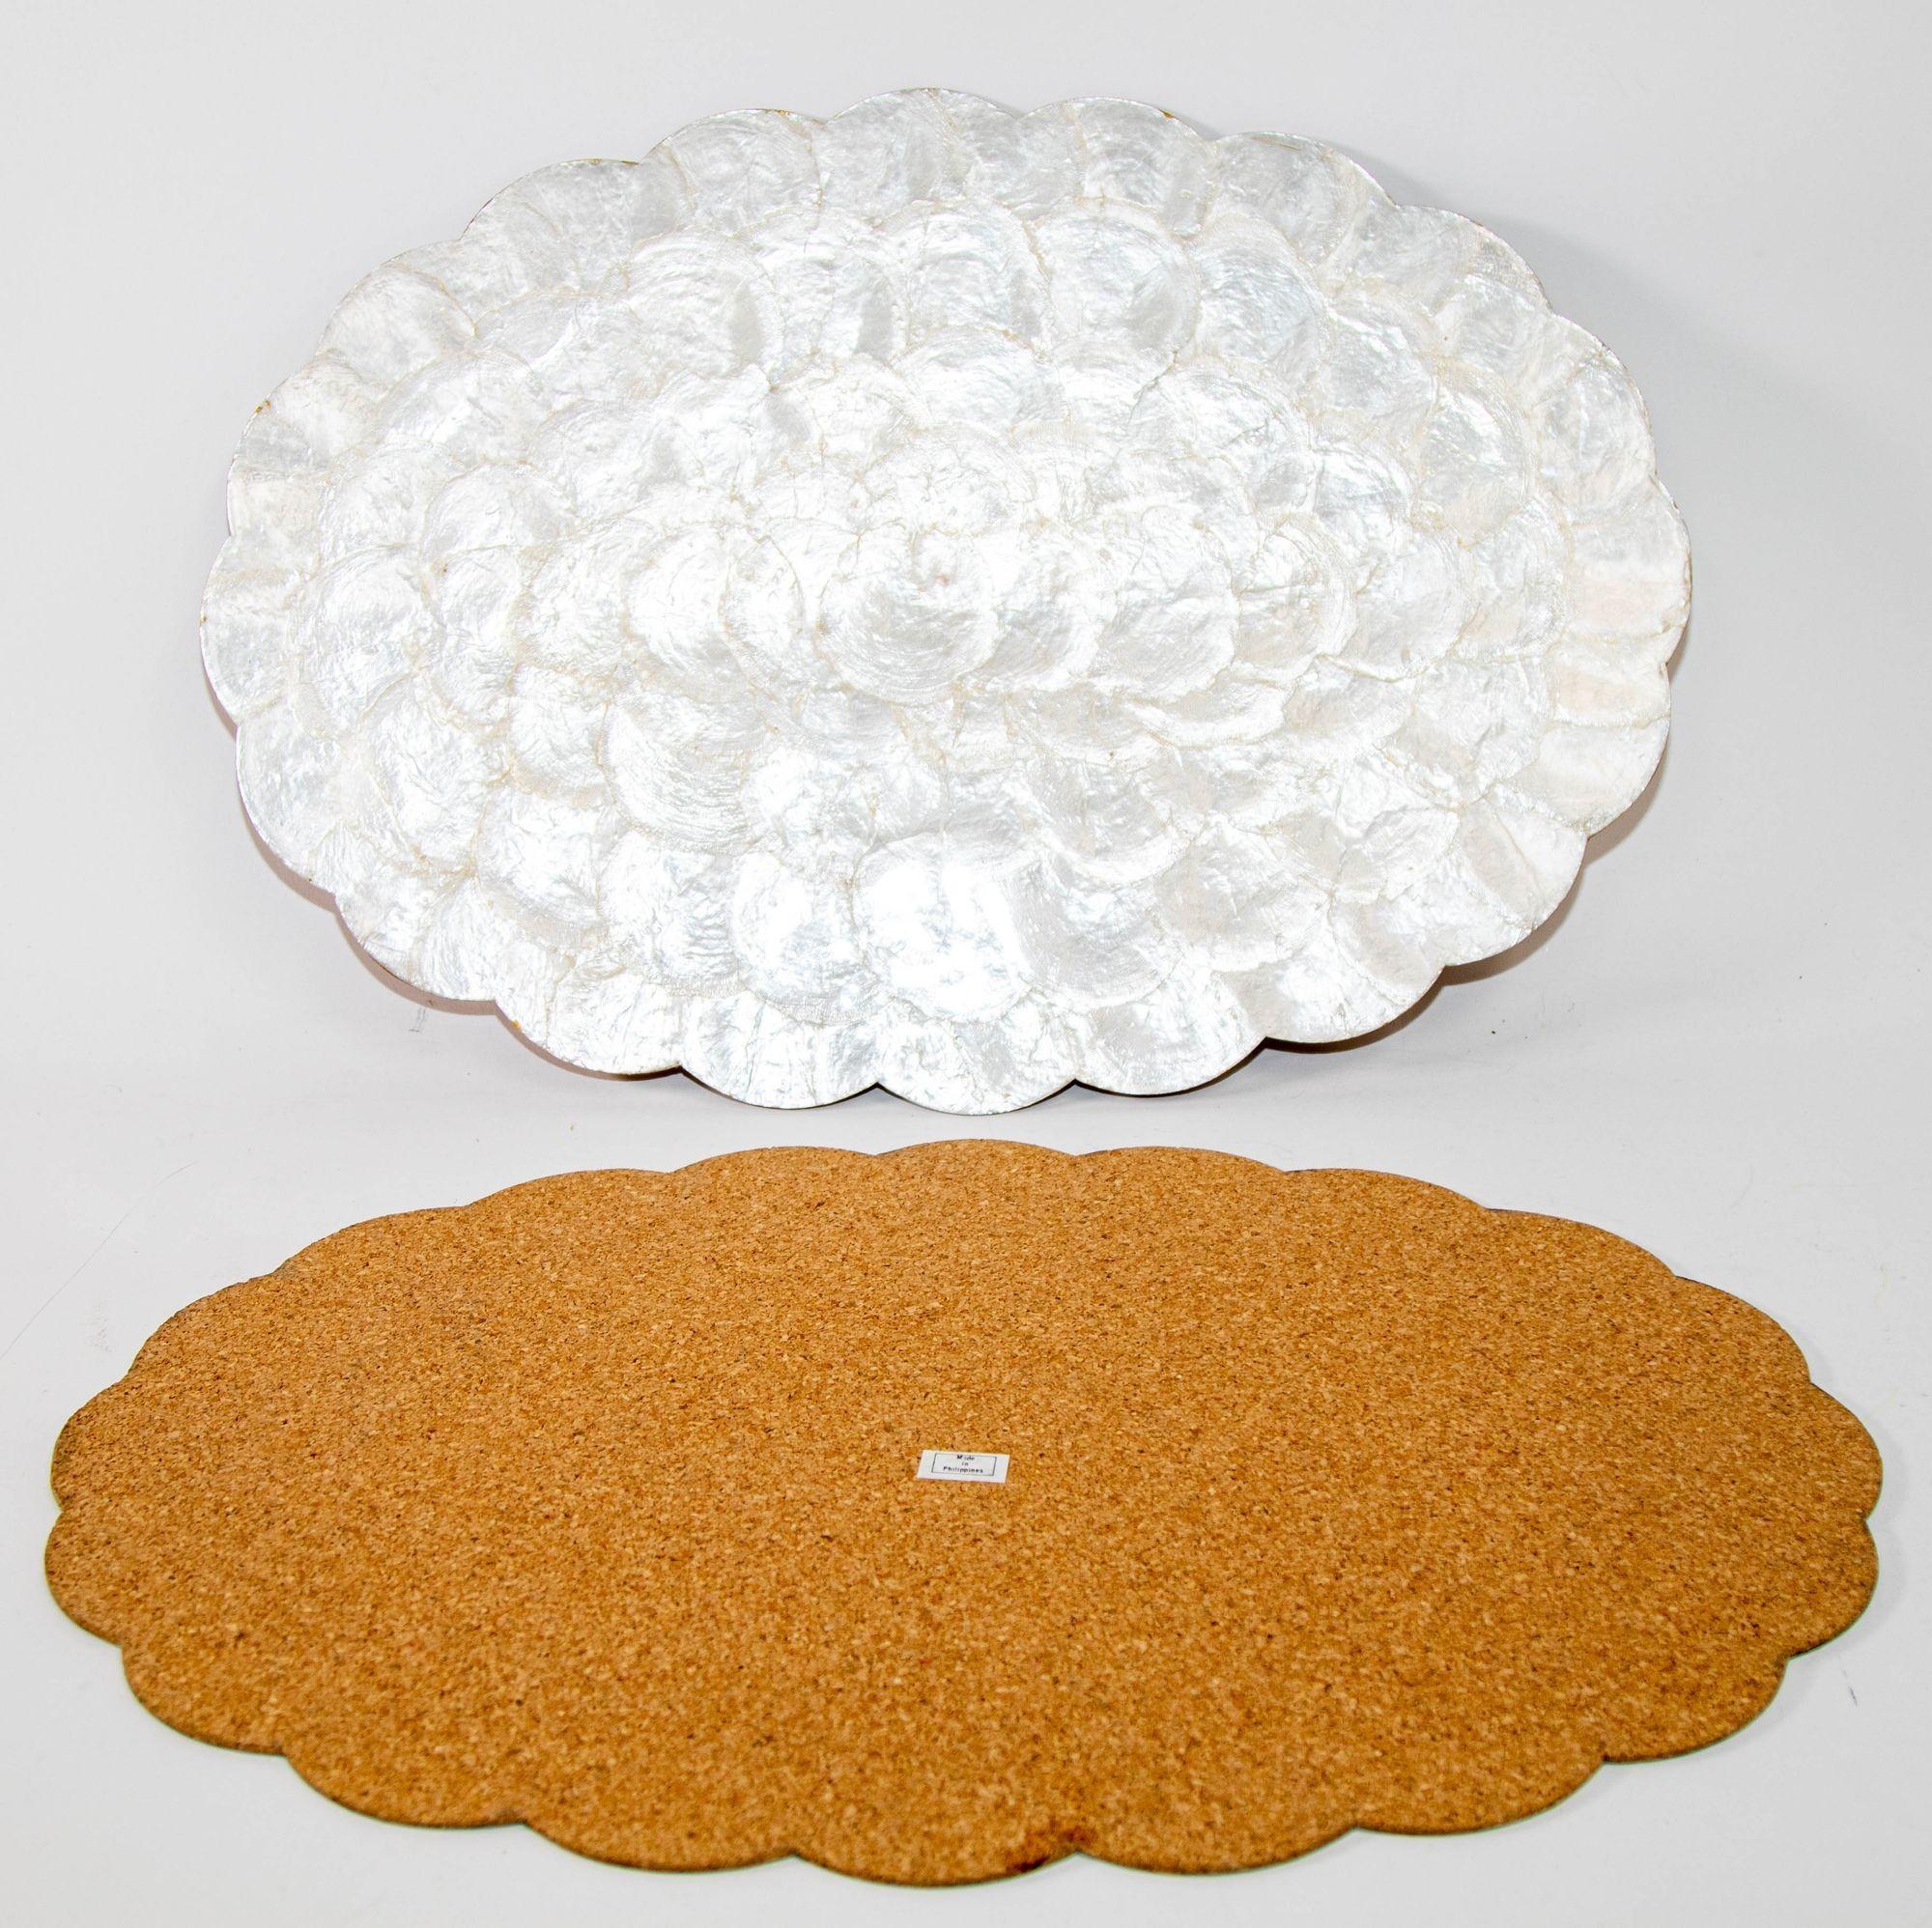 Philippine Vintage Hallie St Mary 2 Placemats in Natural Capiz Pearl Shell Scalloped Edge